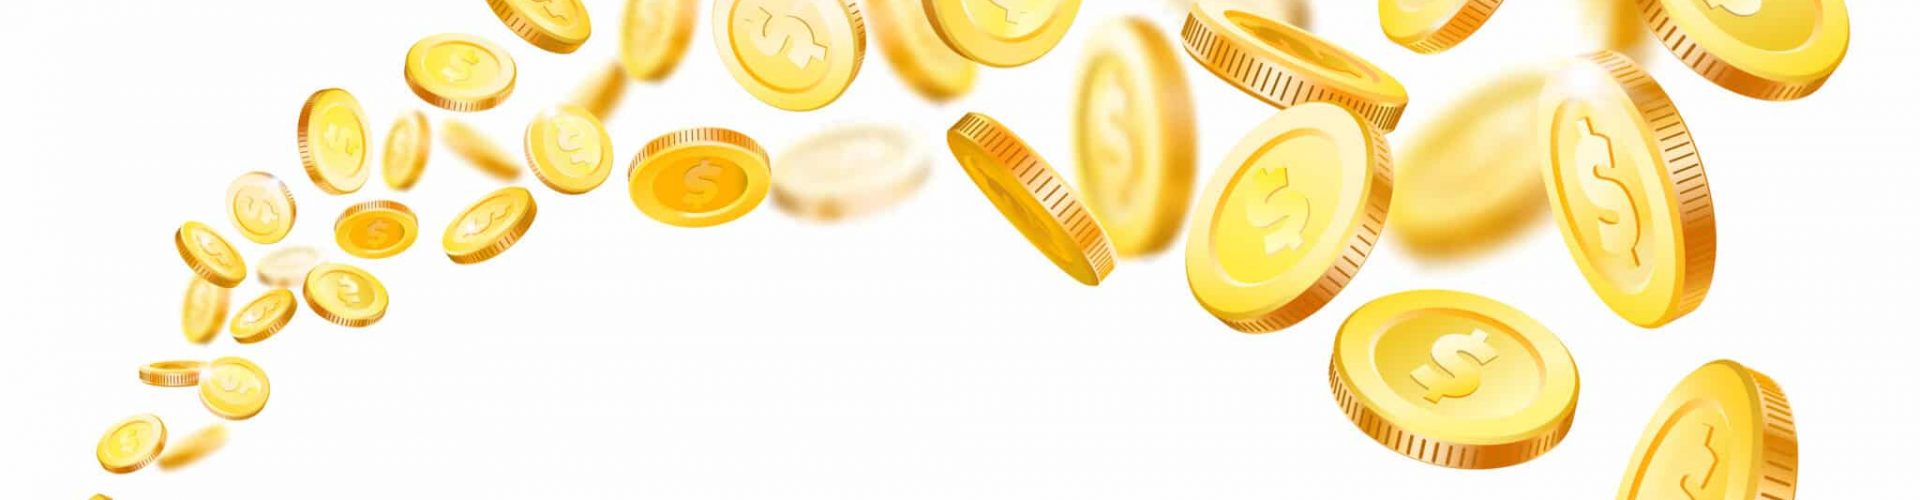 Flying coins. Gold coin fly at stream market profit. Gambling winner casino jackpot golden money falling flow treasure prize dollar cash. Finance investment realistic 3d vector isolated illustration